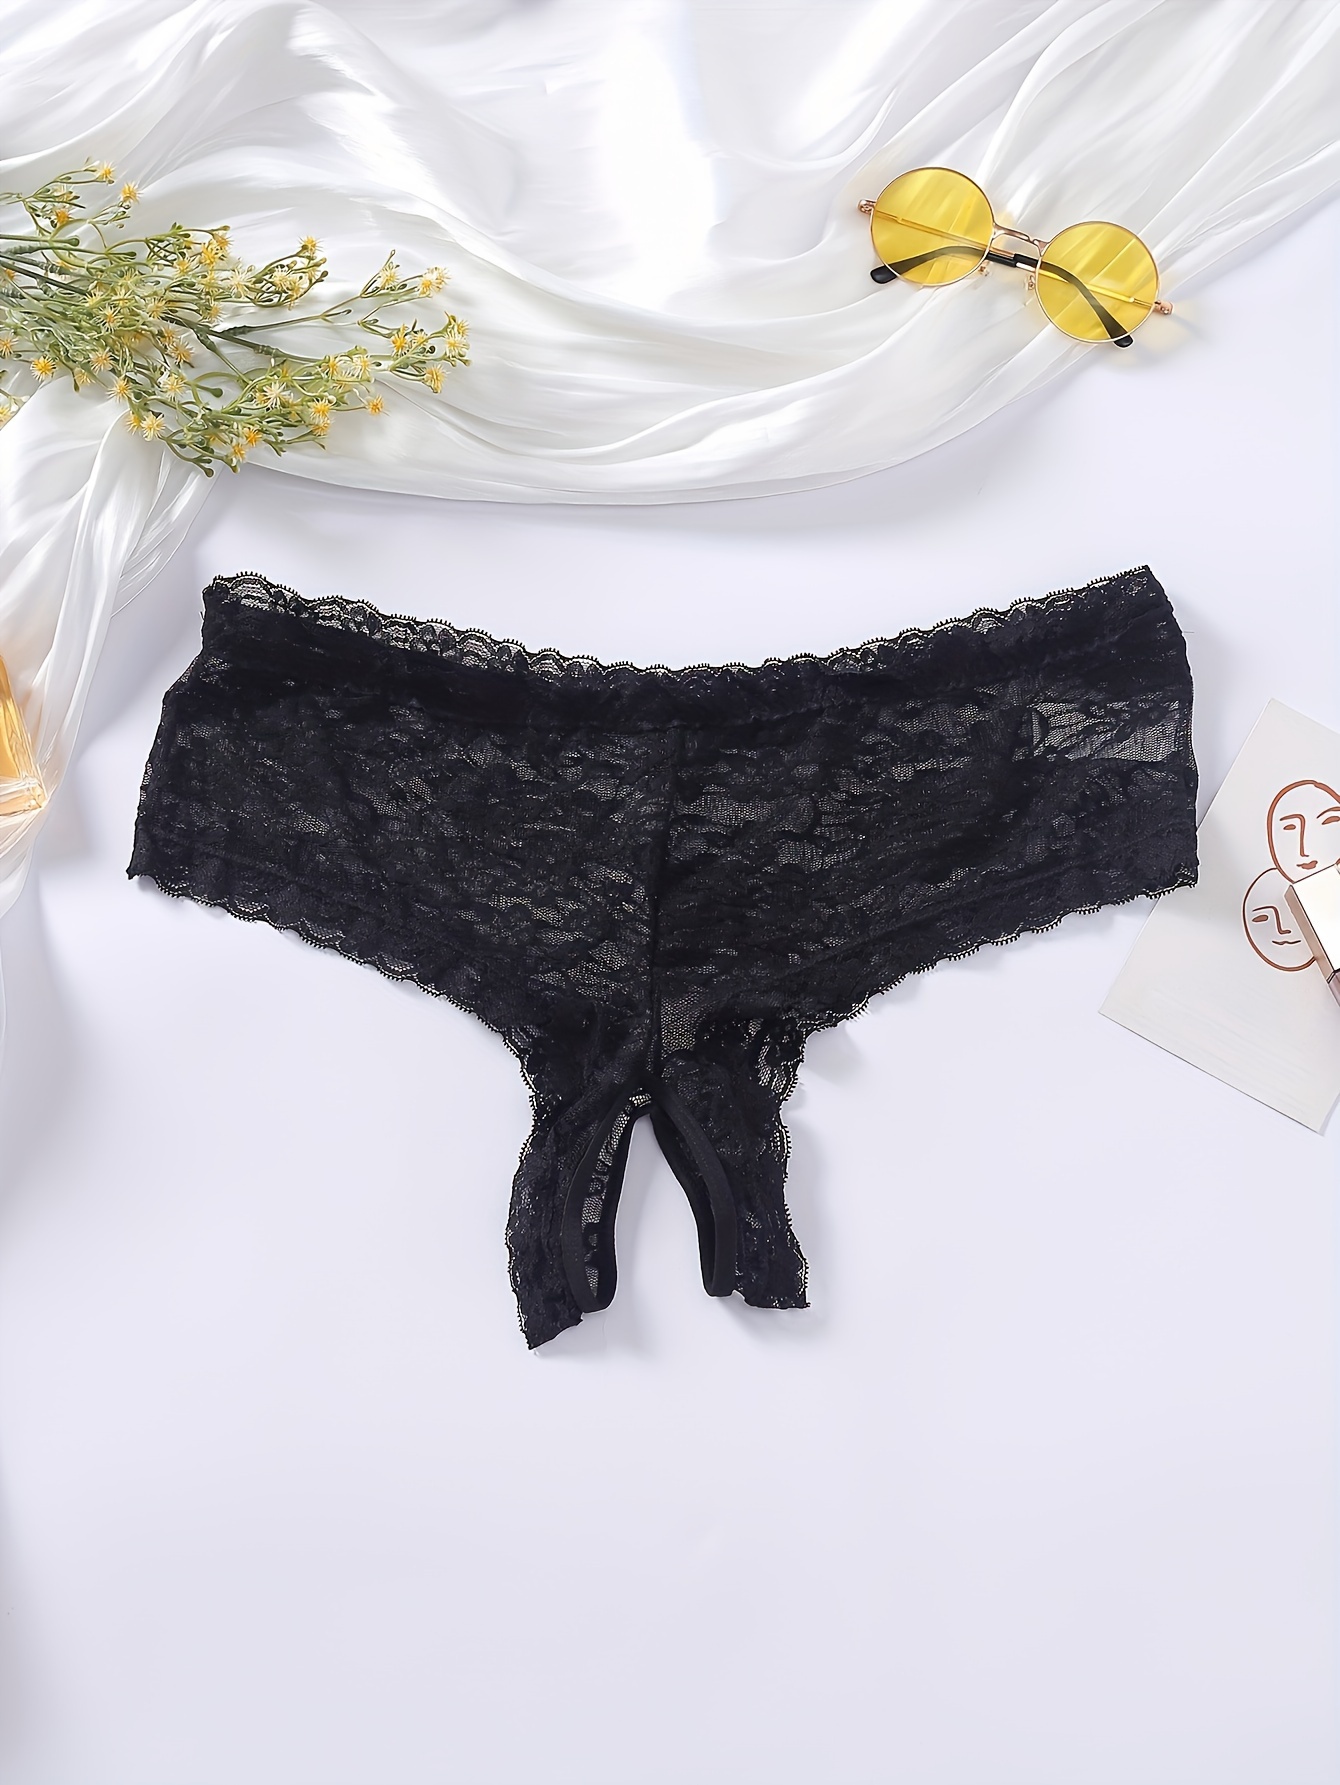 Women Briefs Lace Open Crotch See-Through Knickers Crotchless